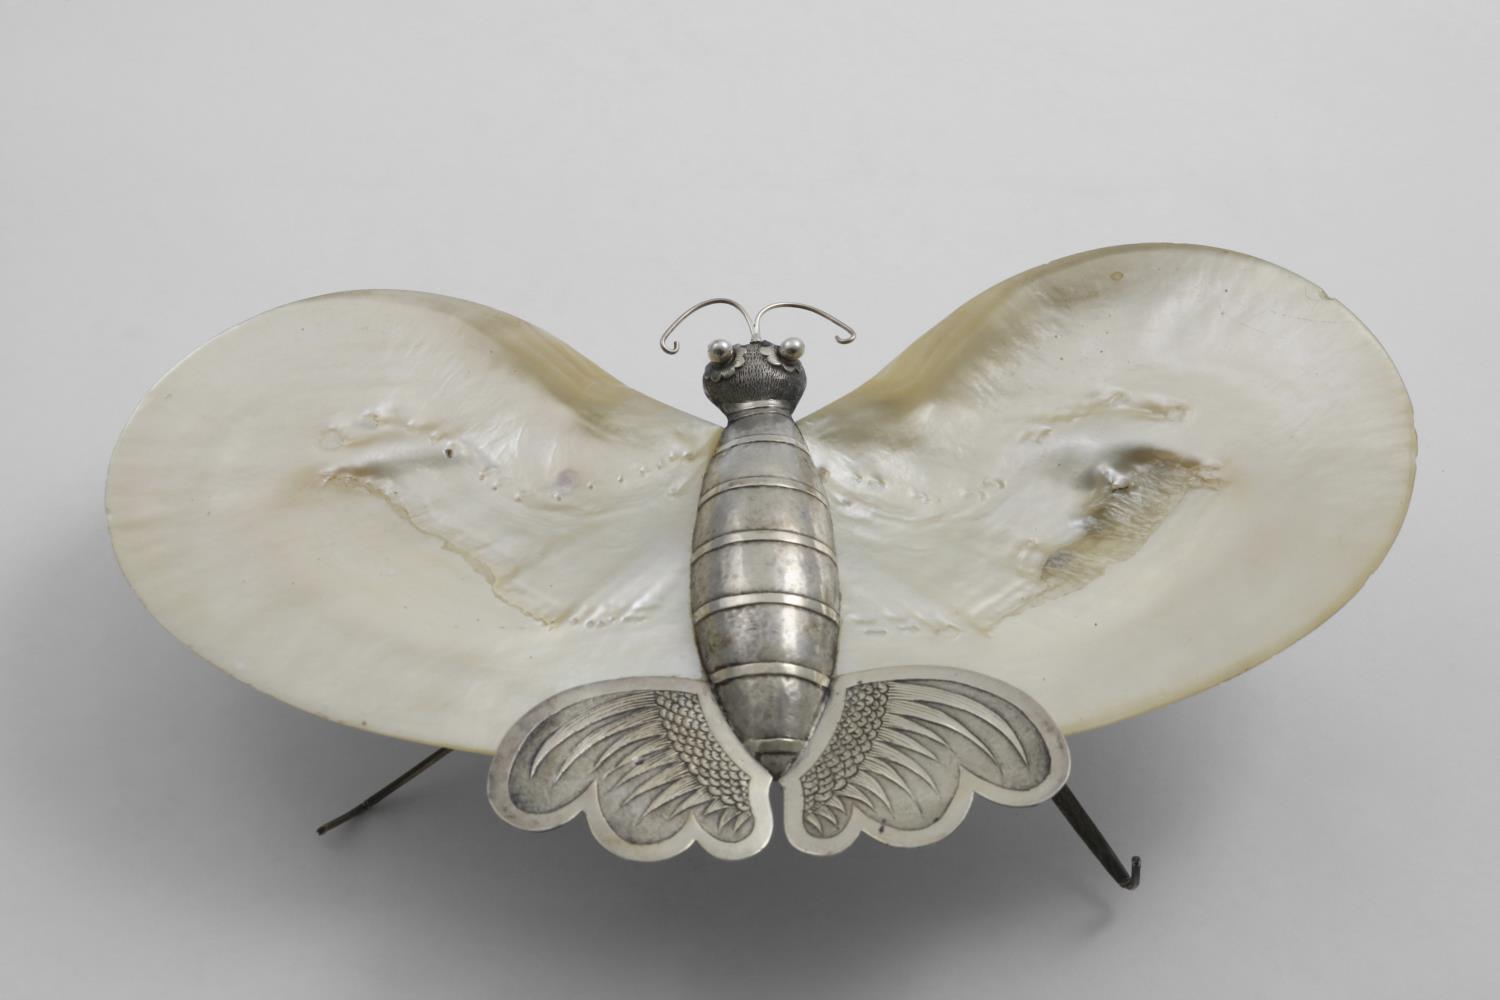 A LATE 19TH / EARLY 20TH CENTURY CHINESE MOTHER OF PEARL MOUNTED DISH resembling a butterfly, by